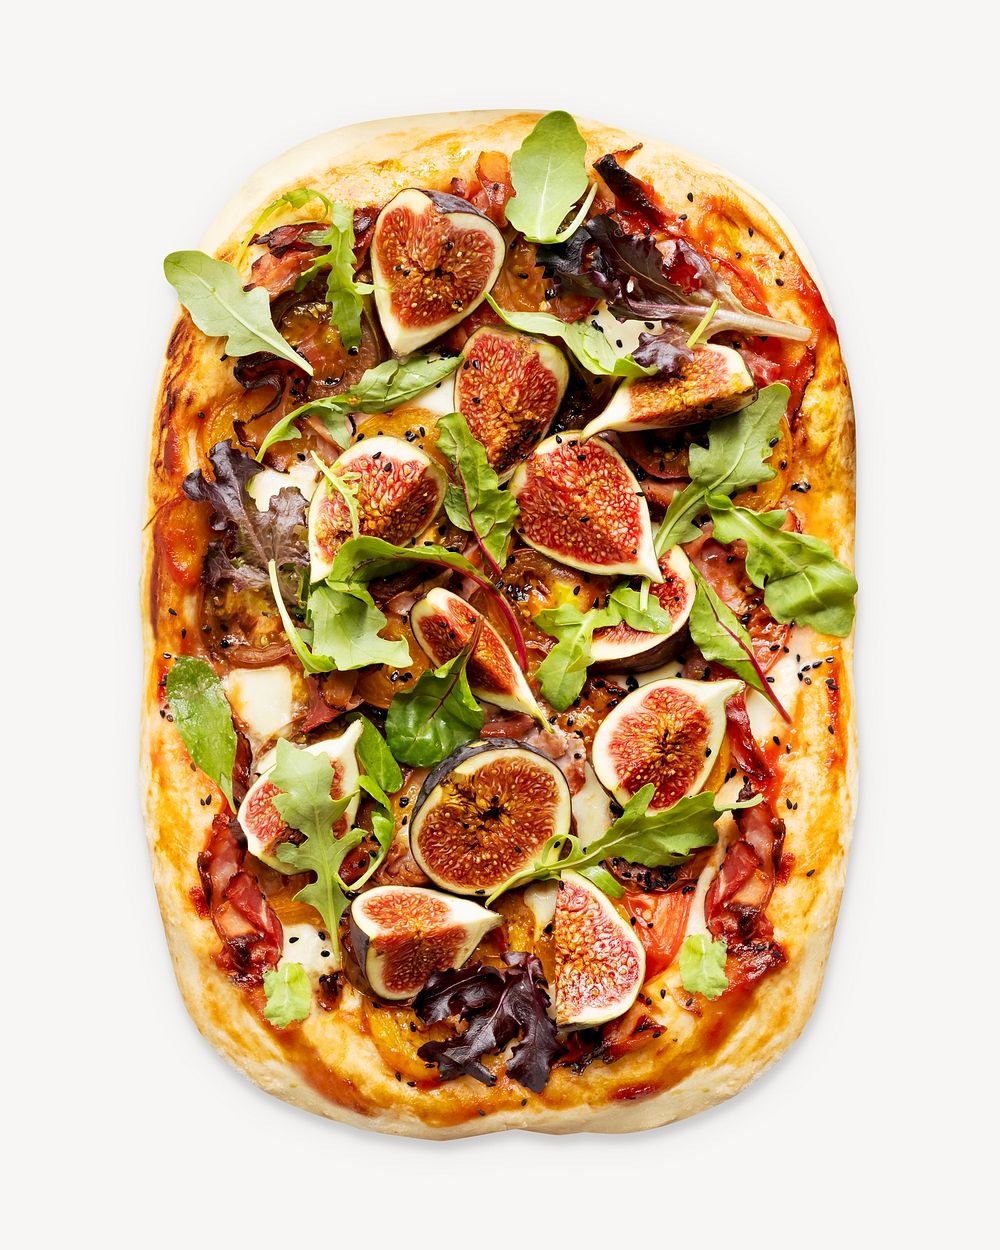 Homemade pizza, food image on white